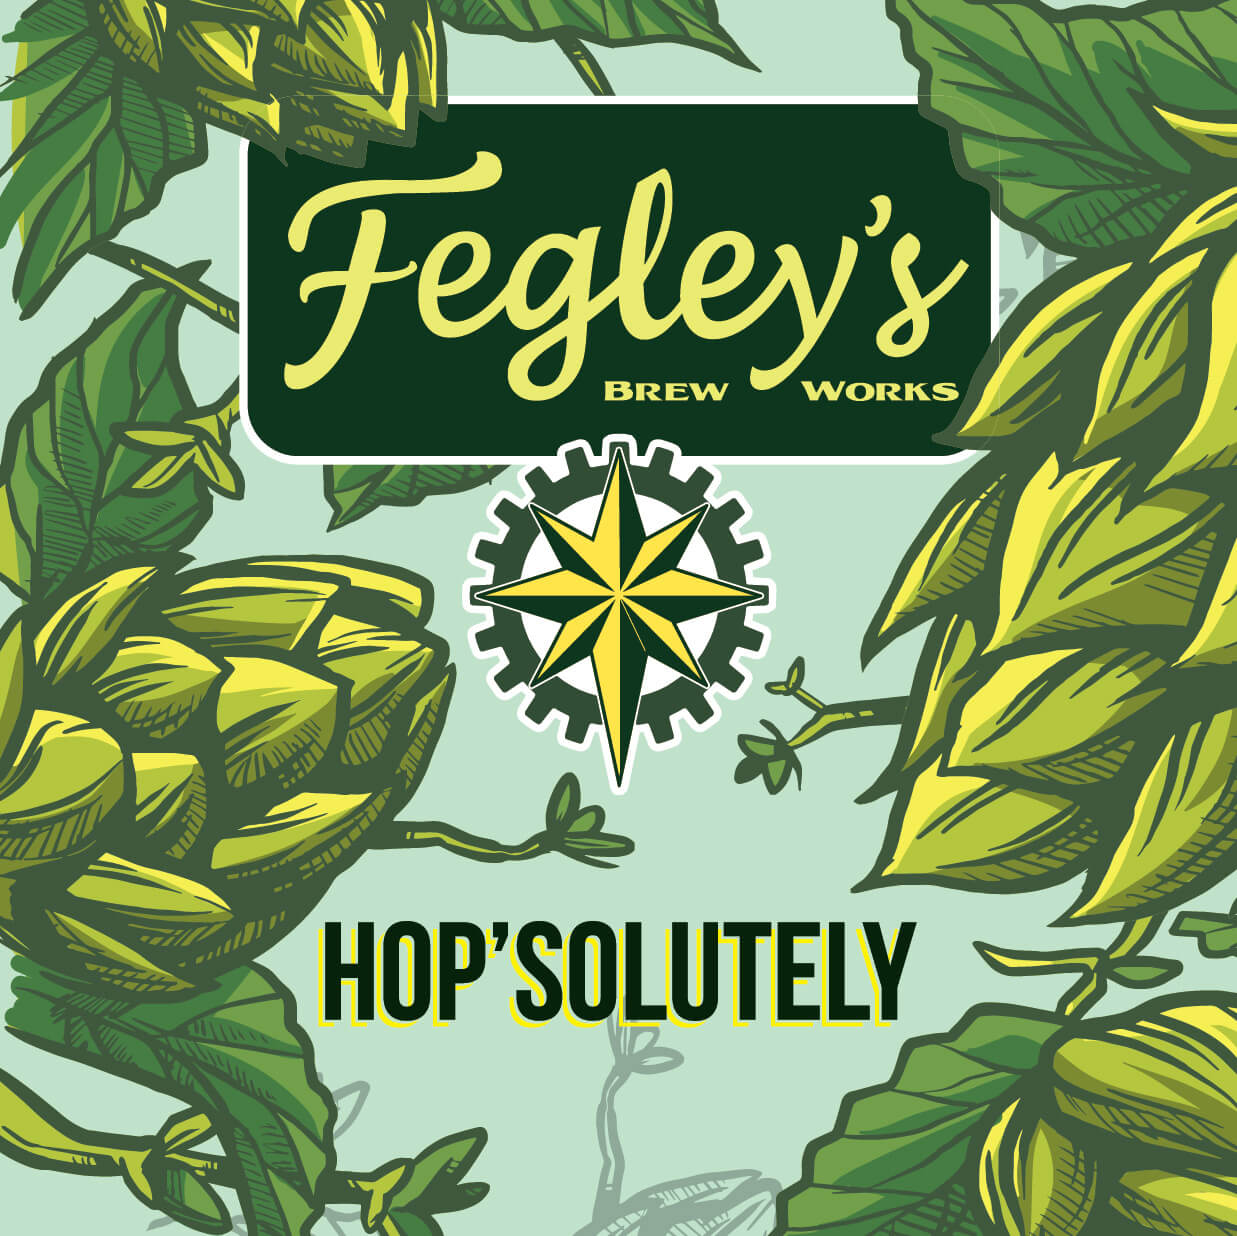 Hop'solutely Triple IPA by Fegley's Brew Works